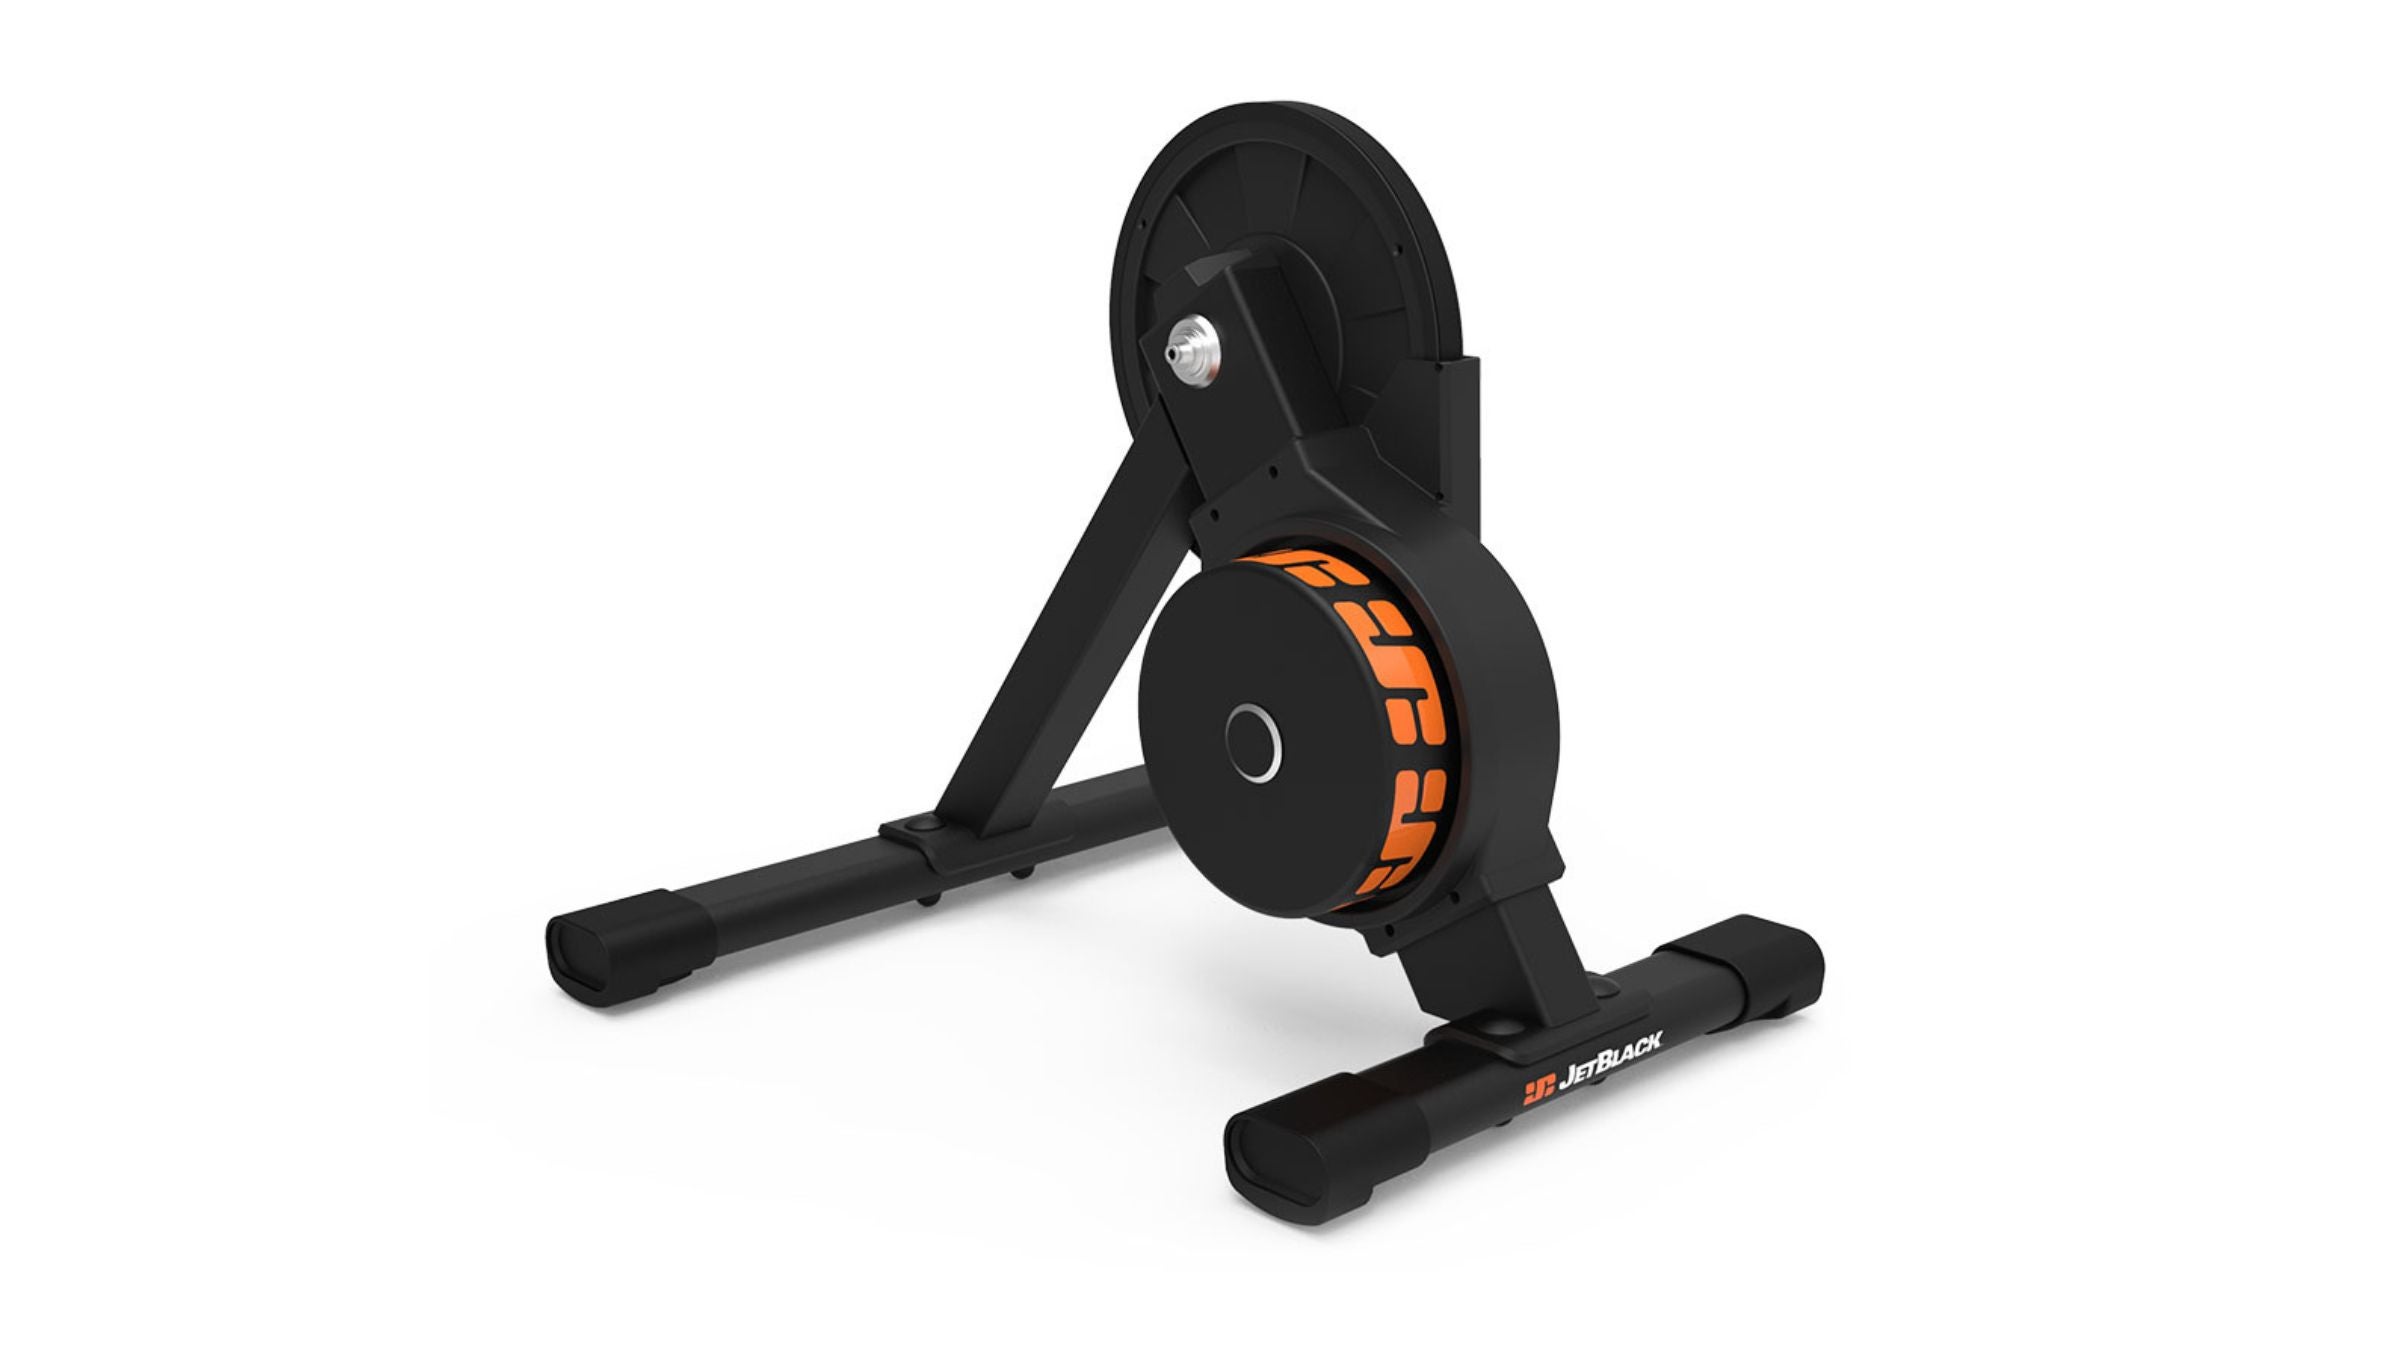 The jetblack volt, one of the best bike trainers for triathletes and cyclists